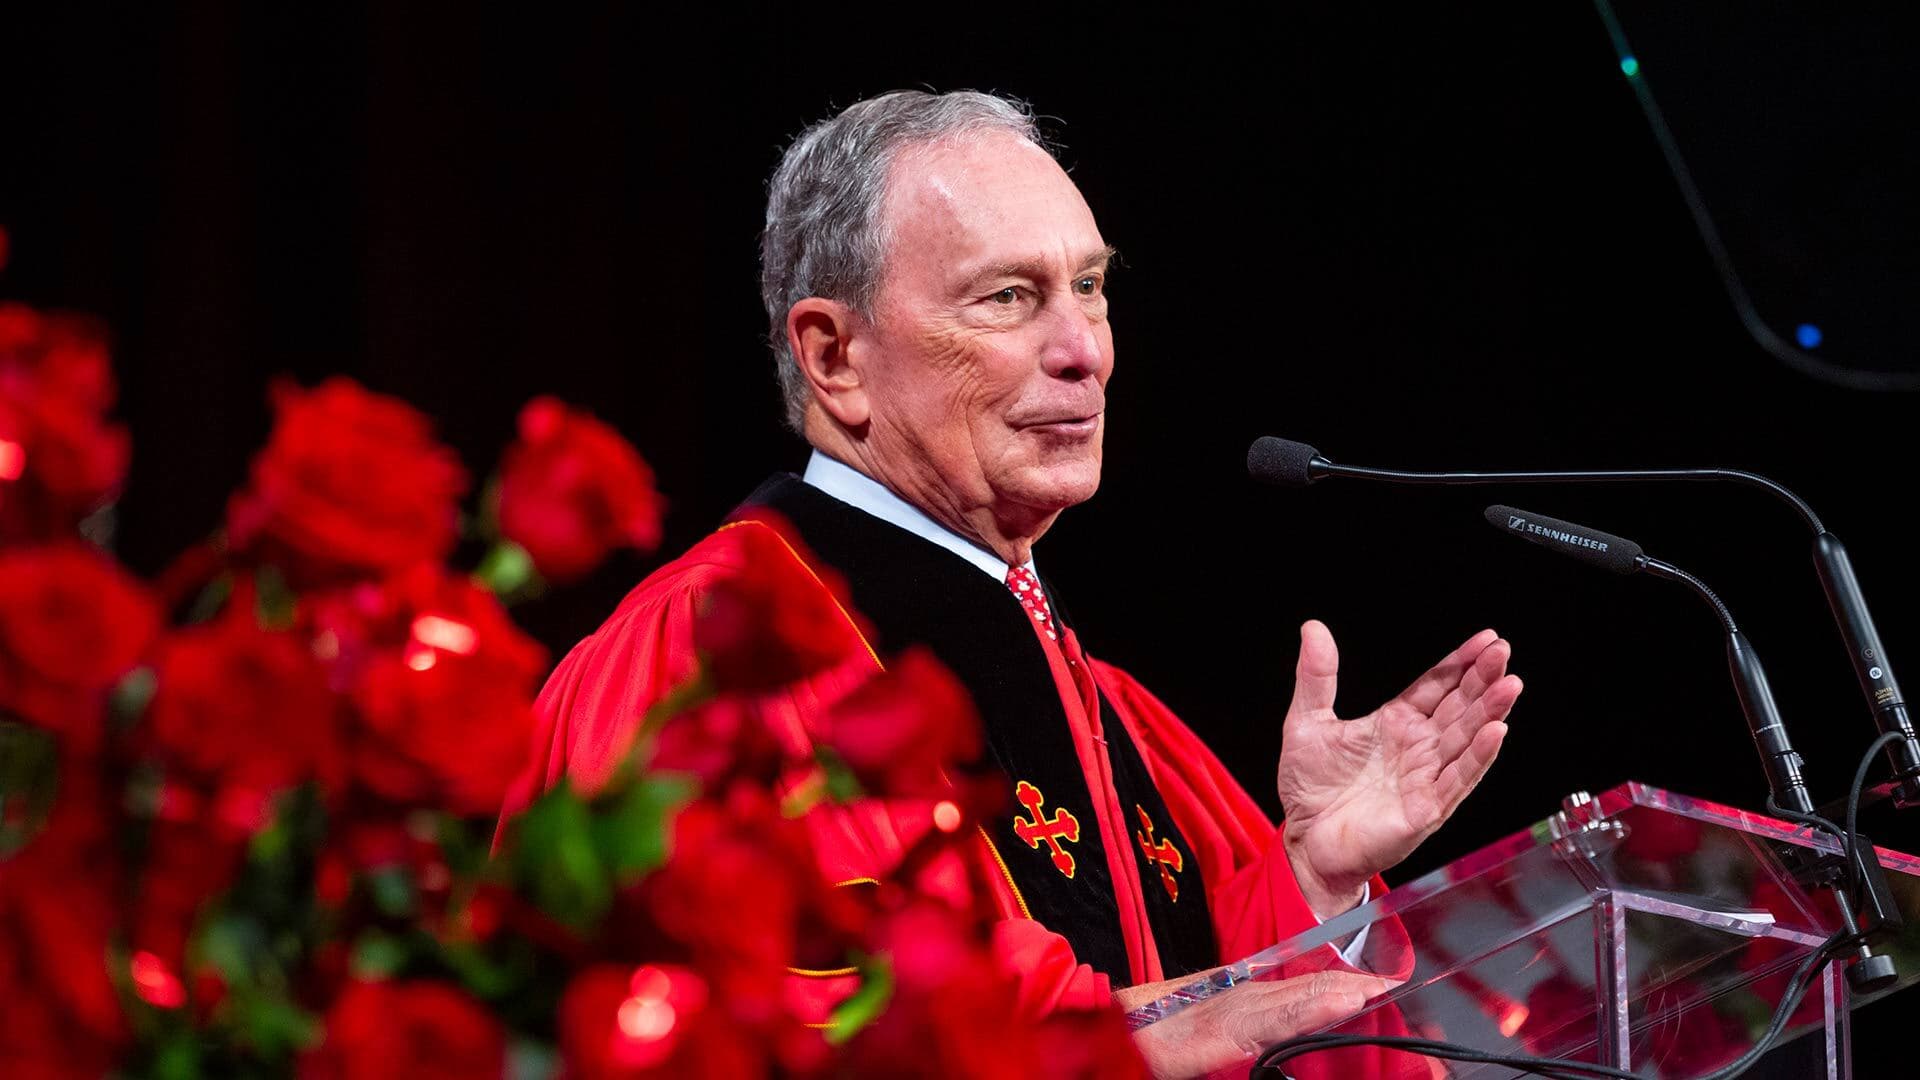 Bloomberg speaks at commencement